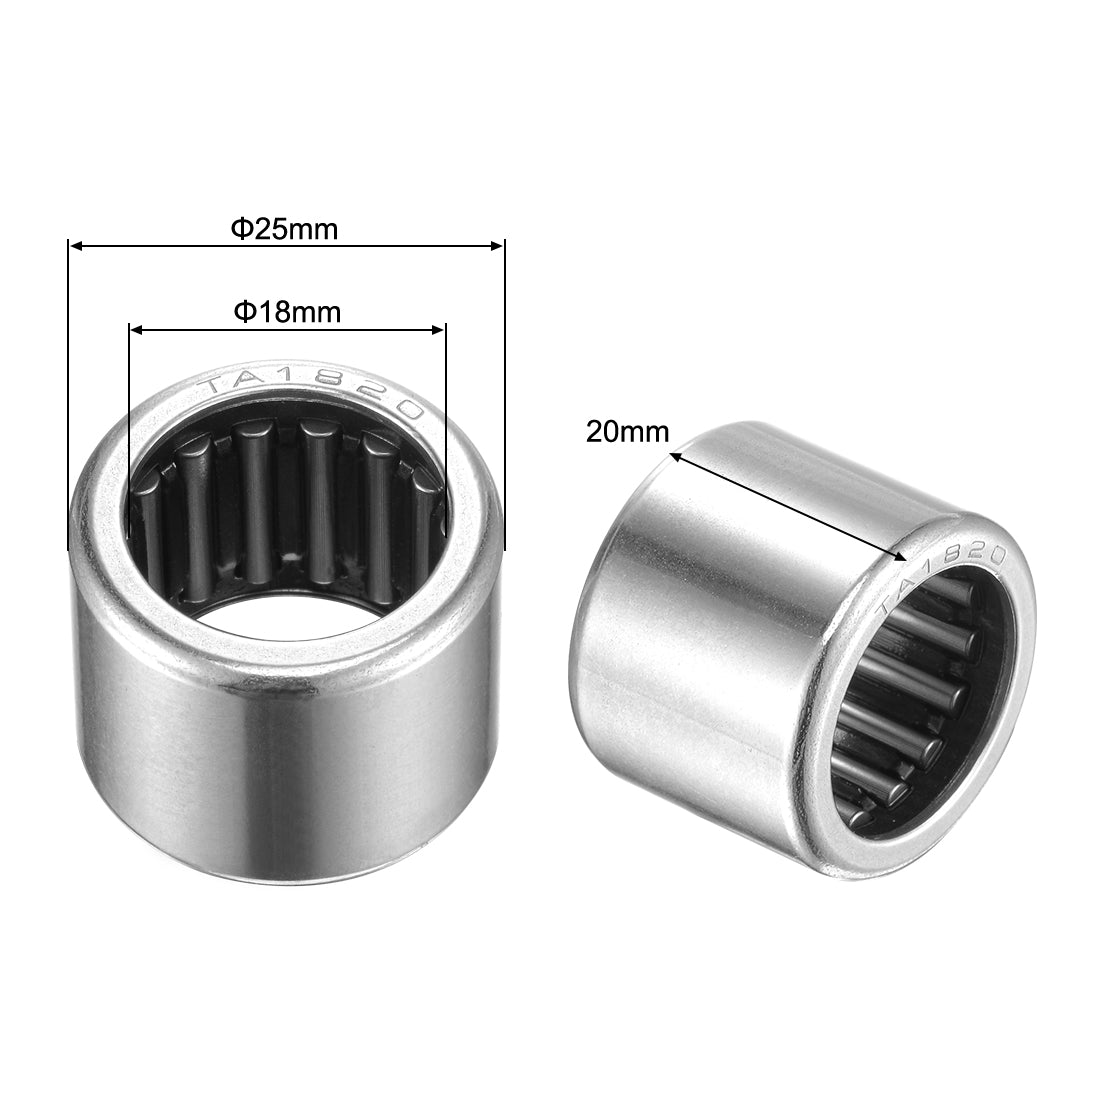 uxcell Uxcell TA1512 Needle Roller Bearings 15mm x 22mm x 12mm Chrome Steel Open End